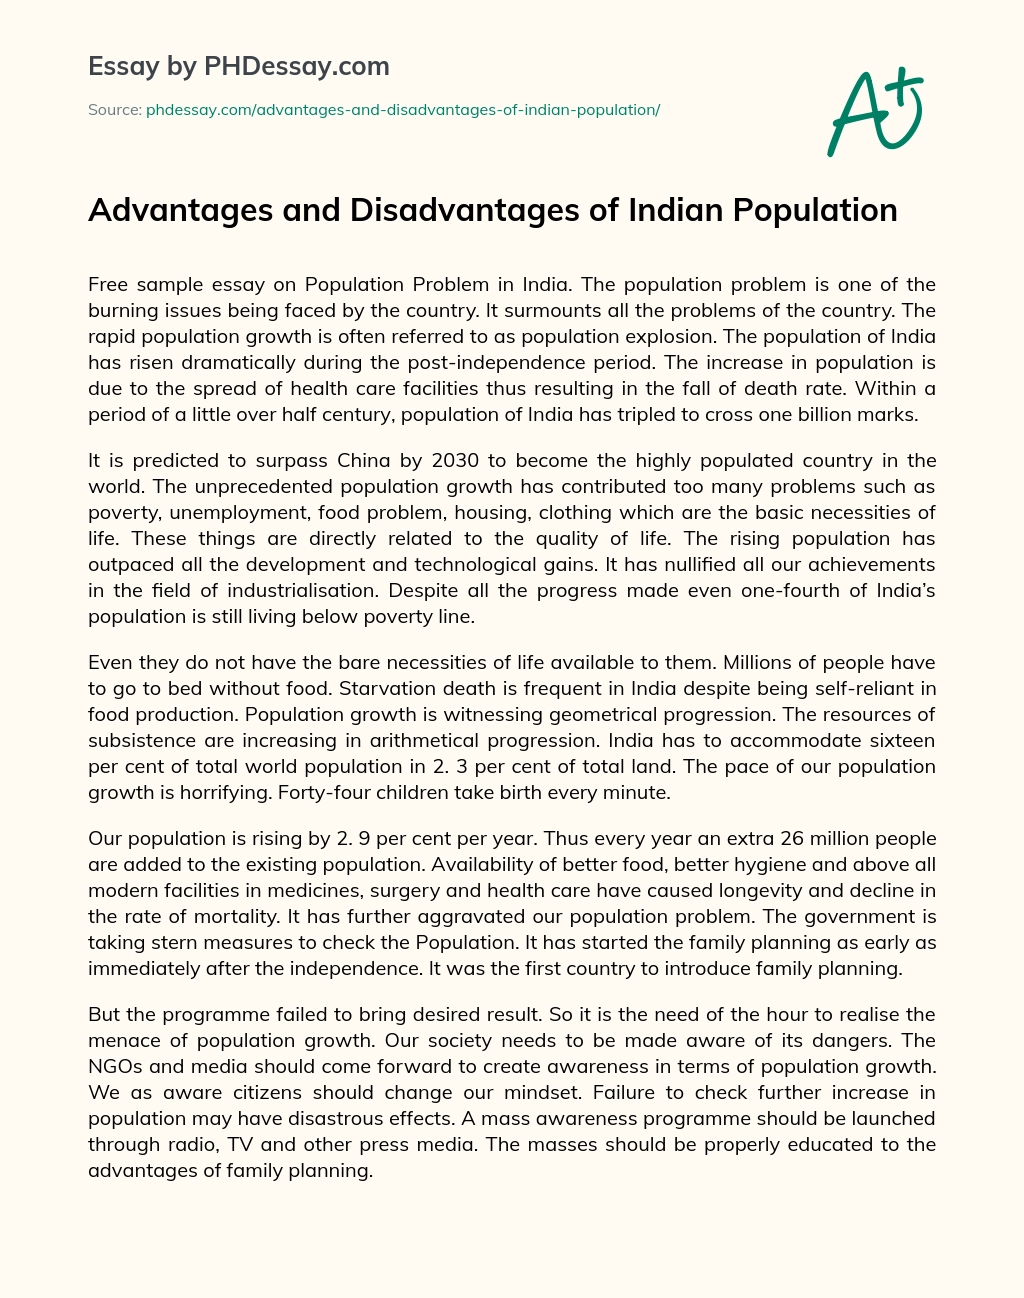 Advantages and Disadvantages of Indian Population essay